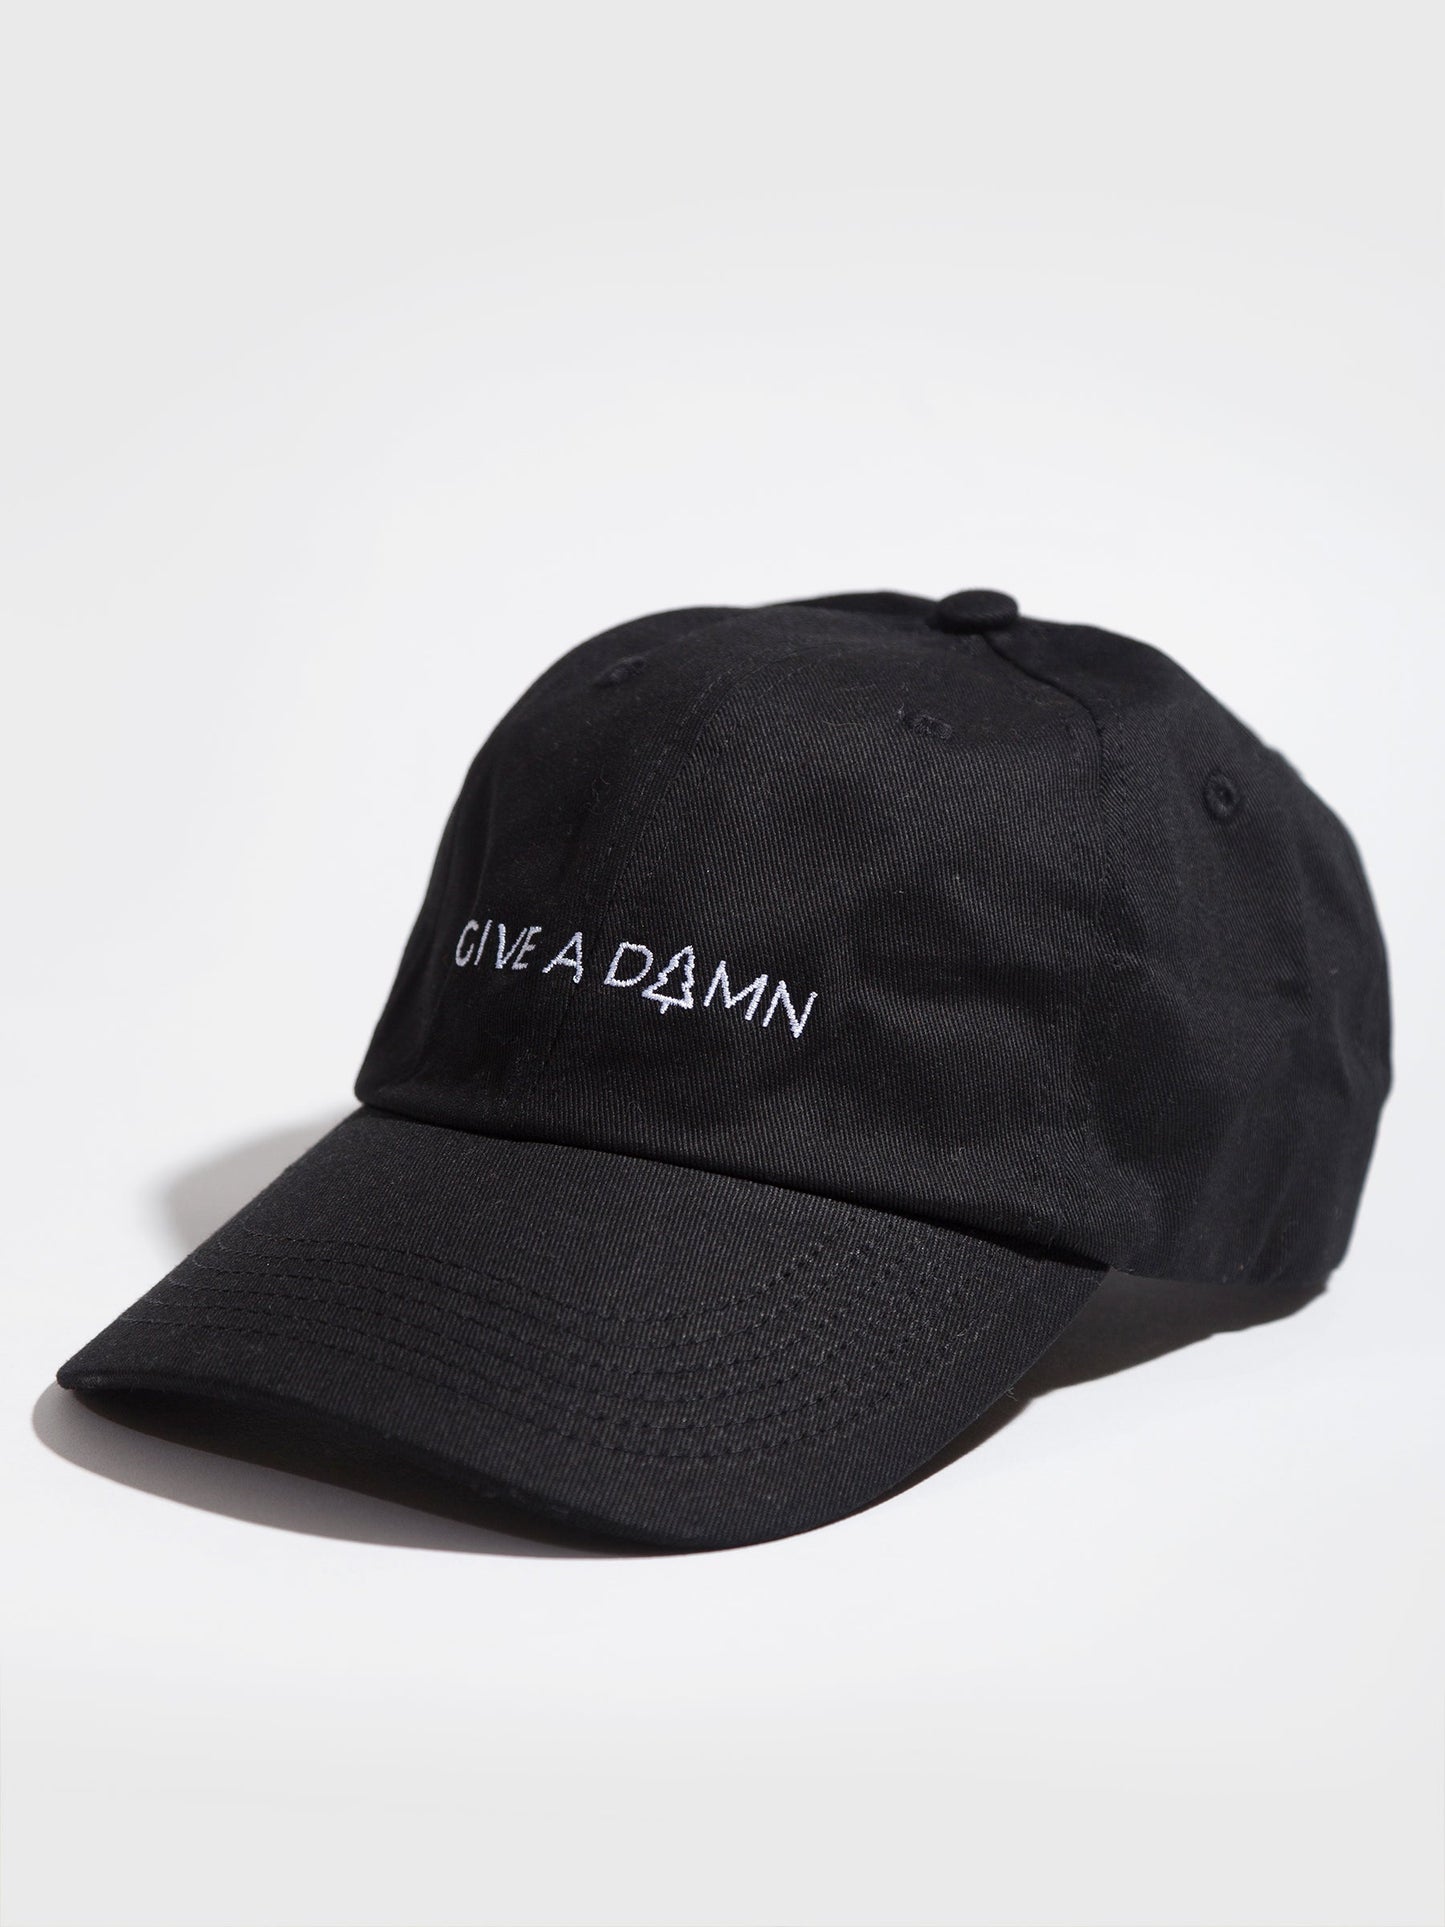 Give A Damn Hat *COLLECTIVE*